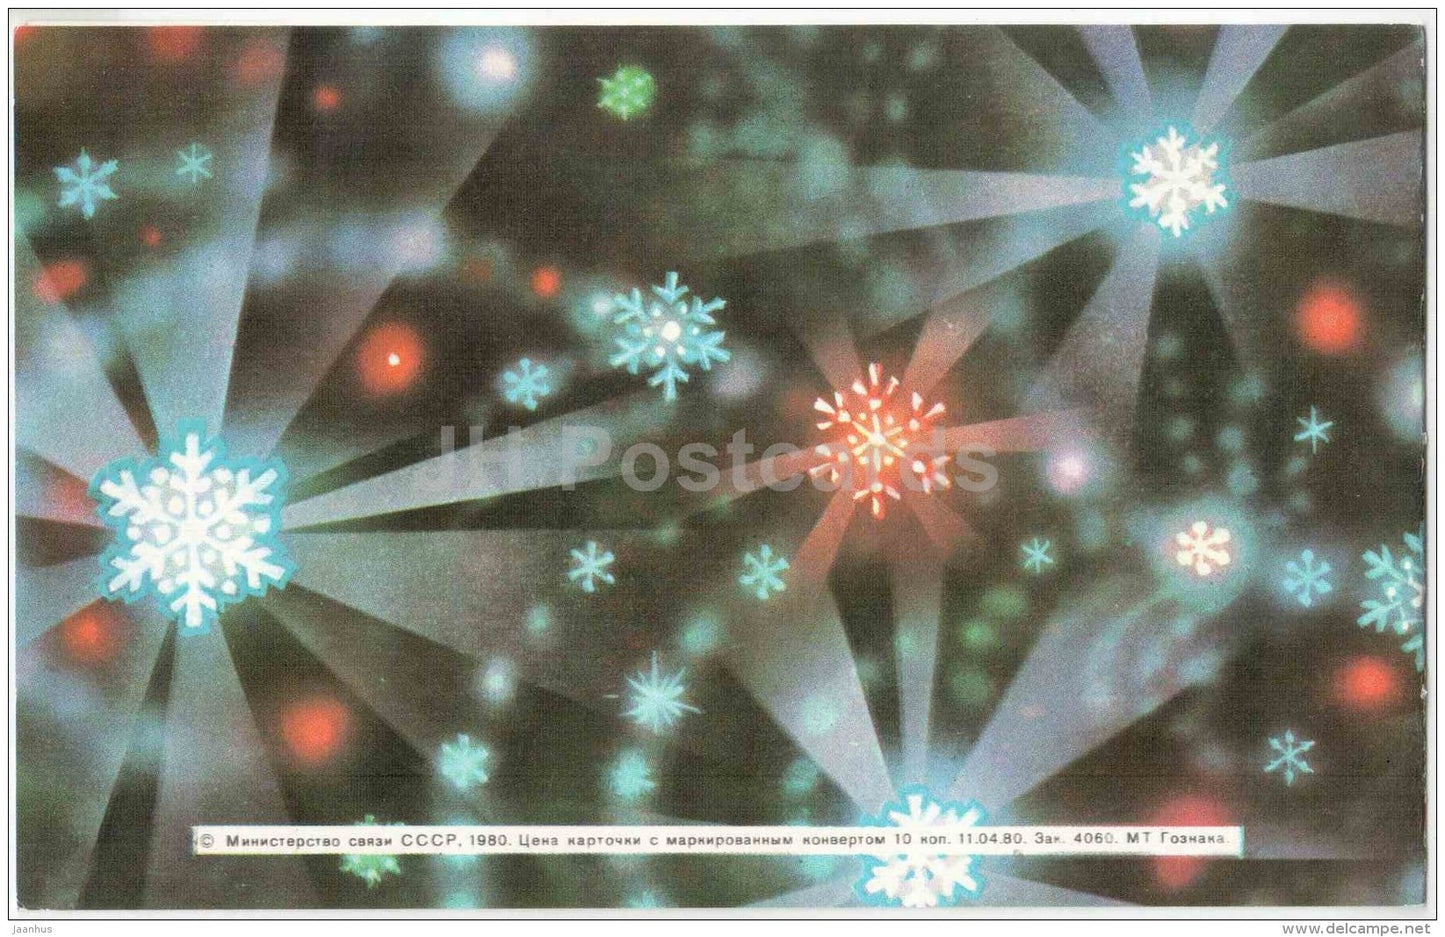 New Year greeting card - snow flakes - 1980 - Russia USSR - unused - JH Postcards